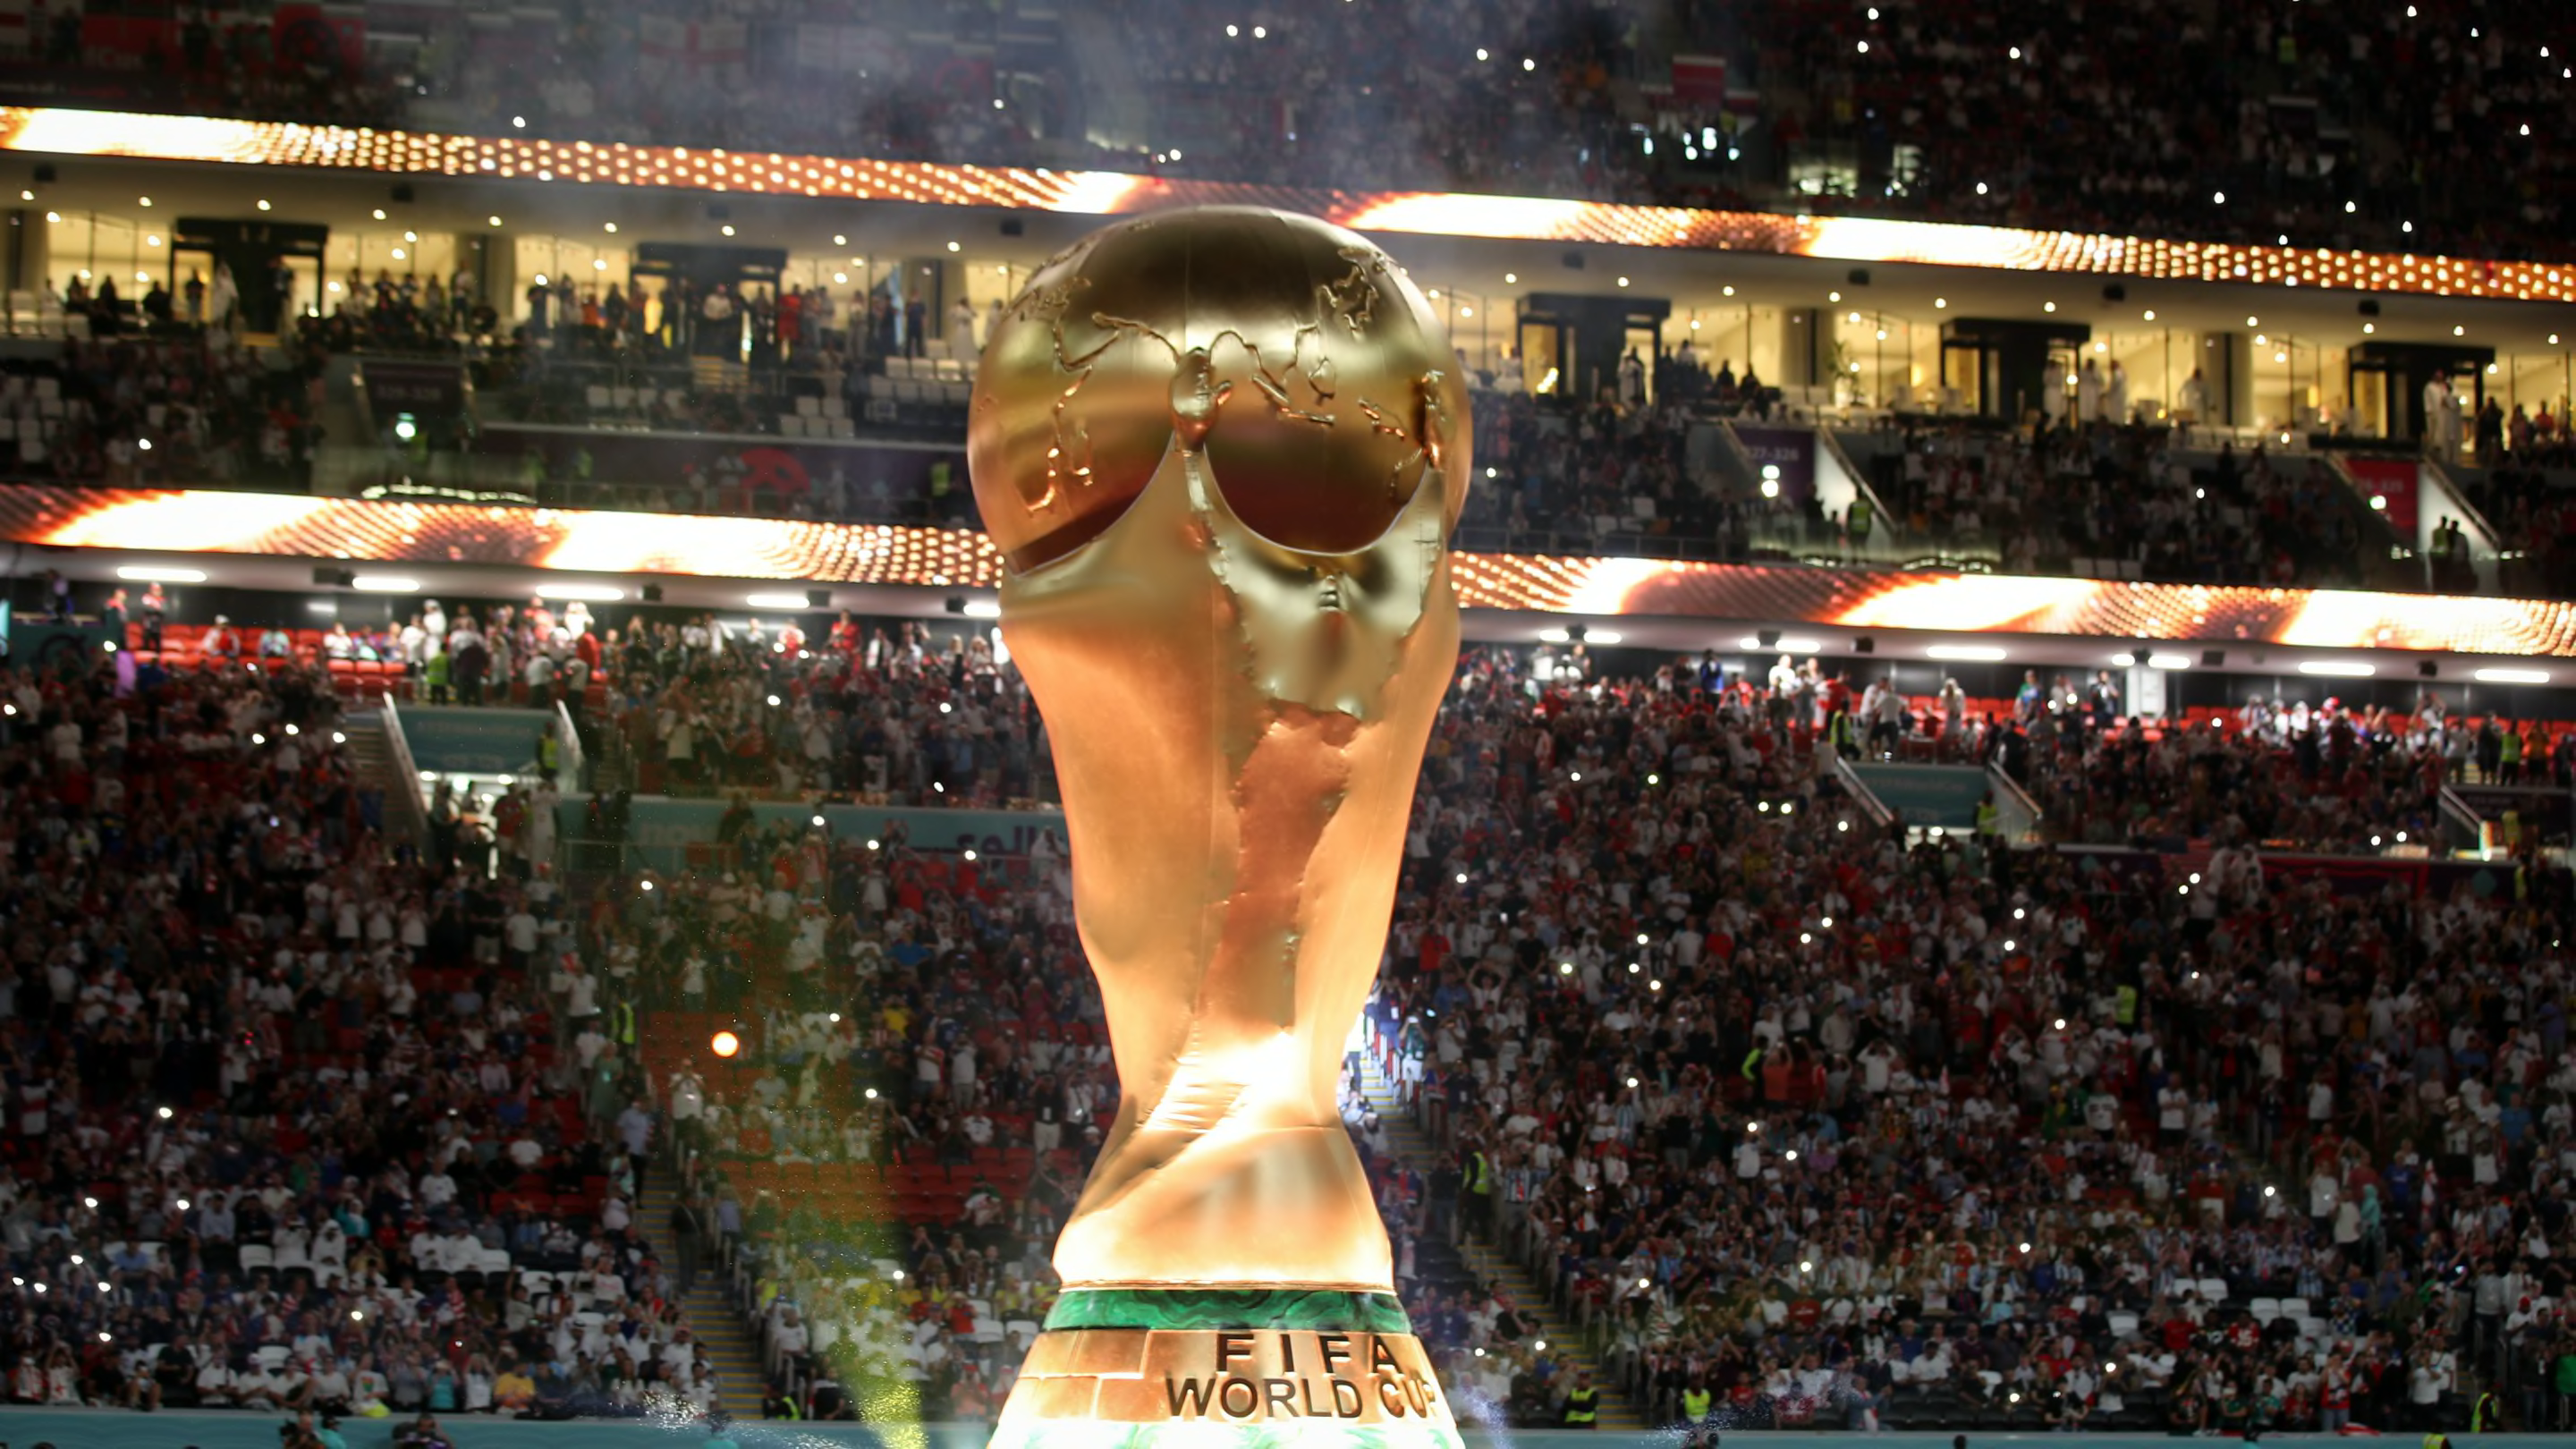 How many teams will play at the 2026 World Cup?